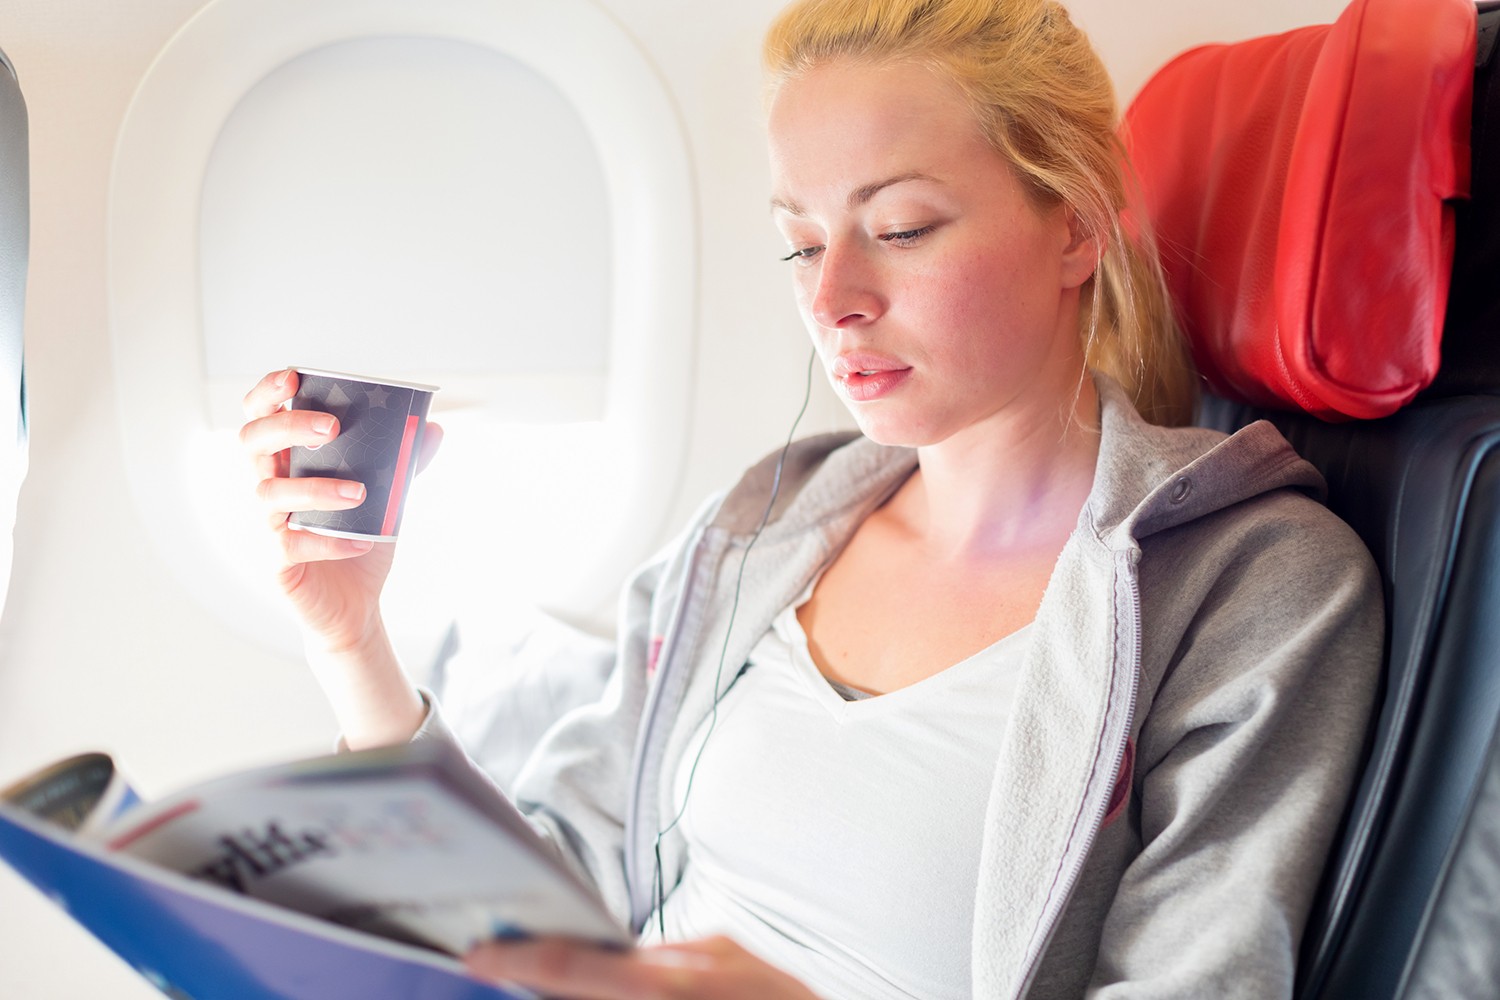 Six ways to make your long flight suck less by popular travel blogger My Beauty Bunny